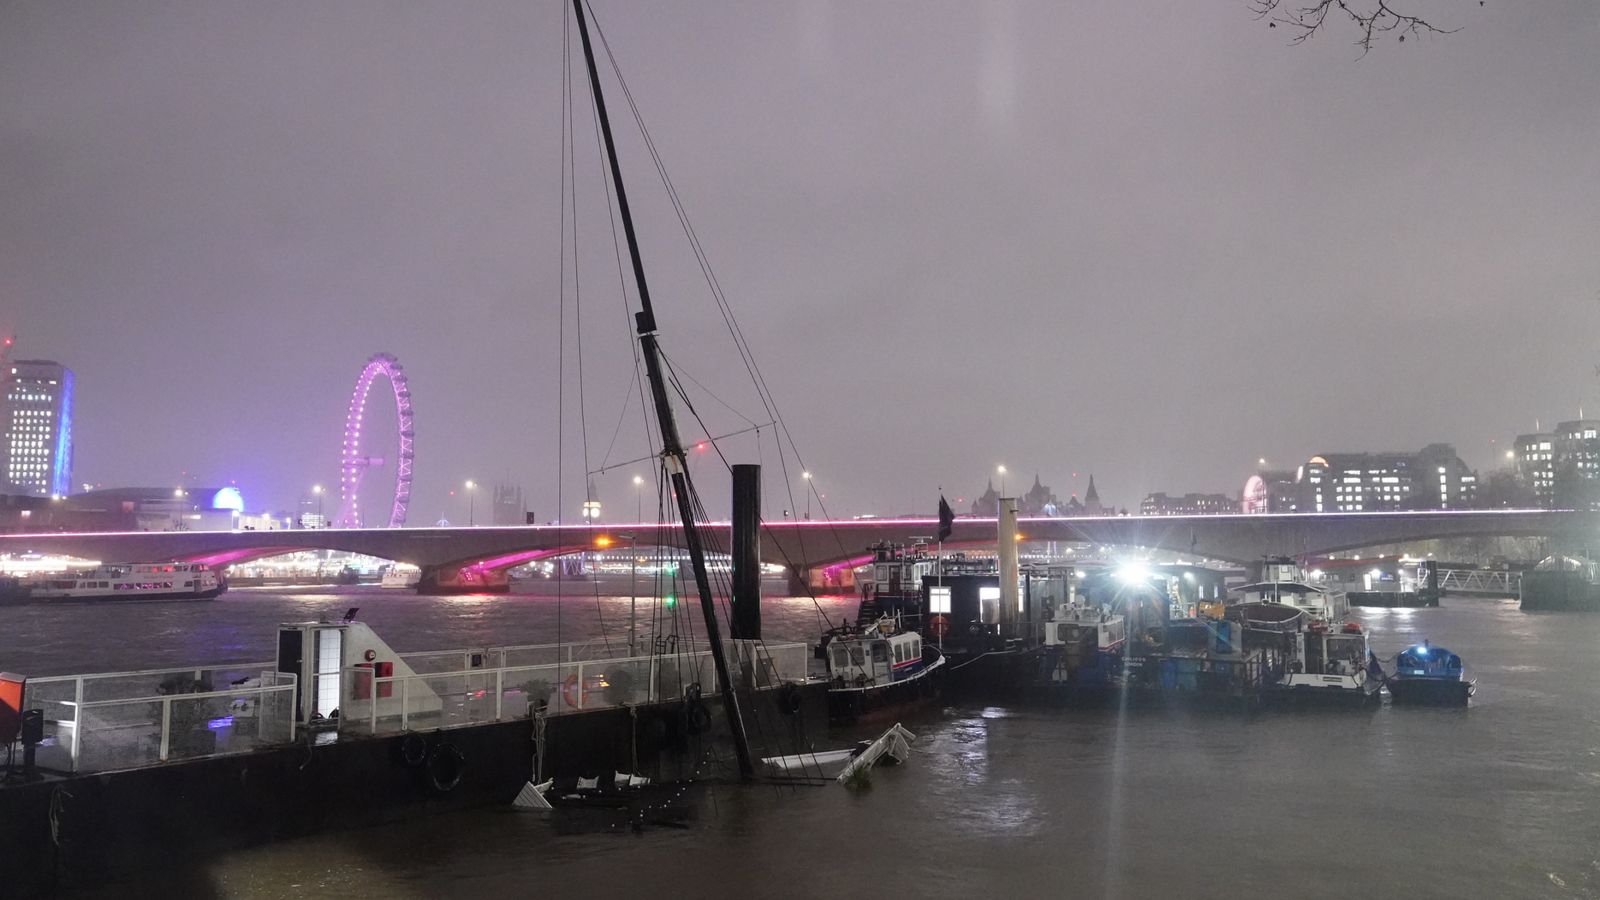 UK weather: Rescues and evacuations after widespread flooding - as party boat sinks in Thames